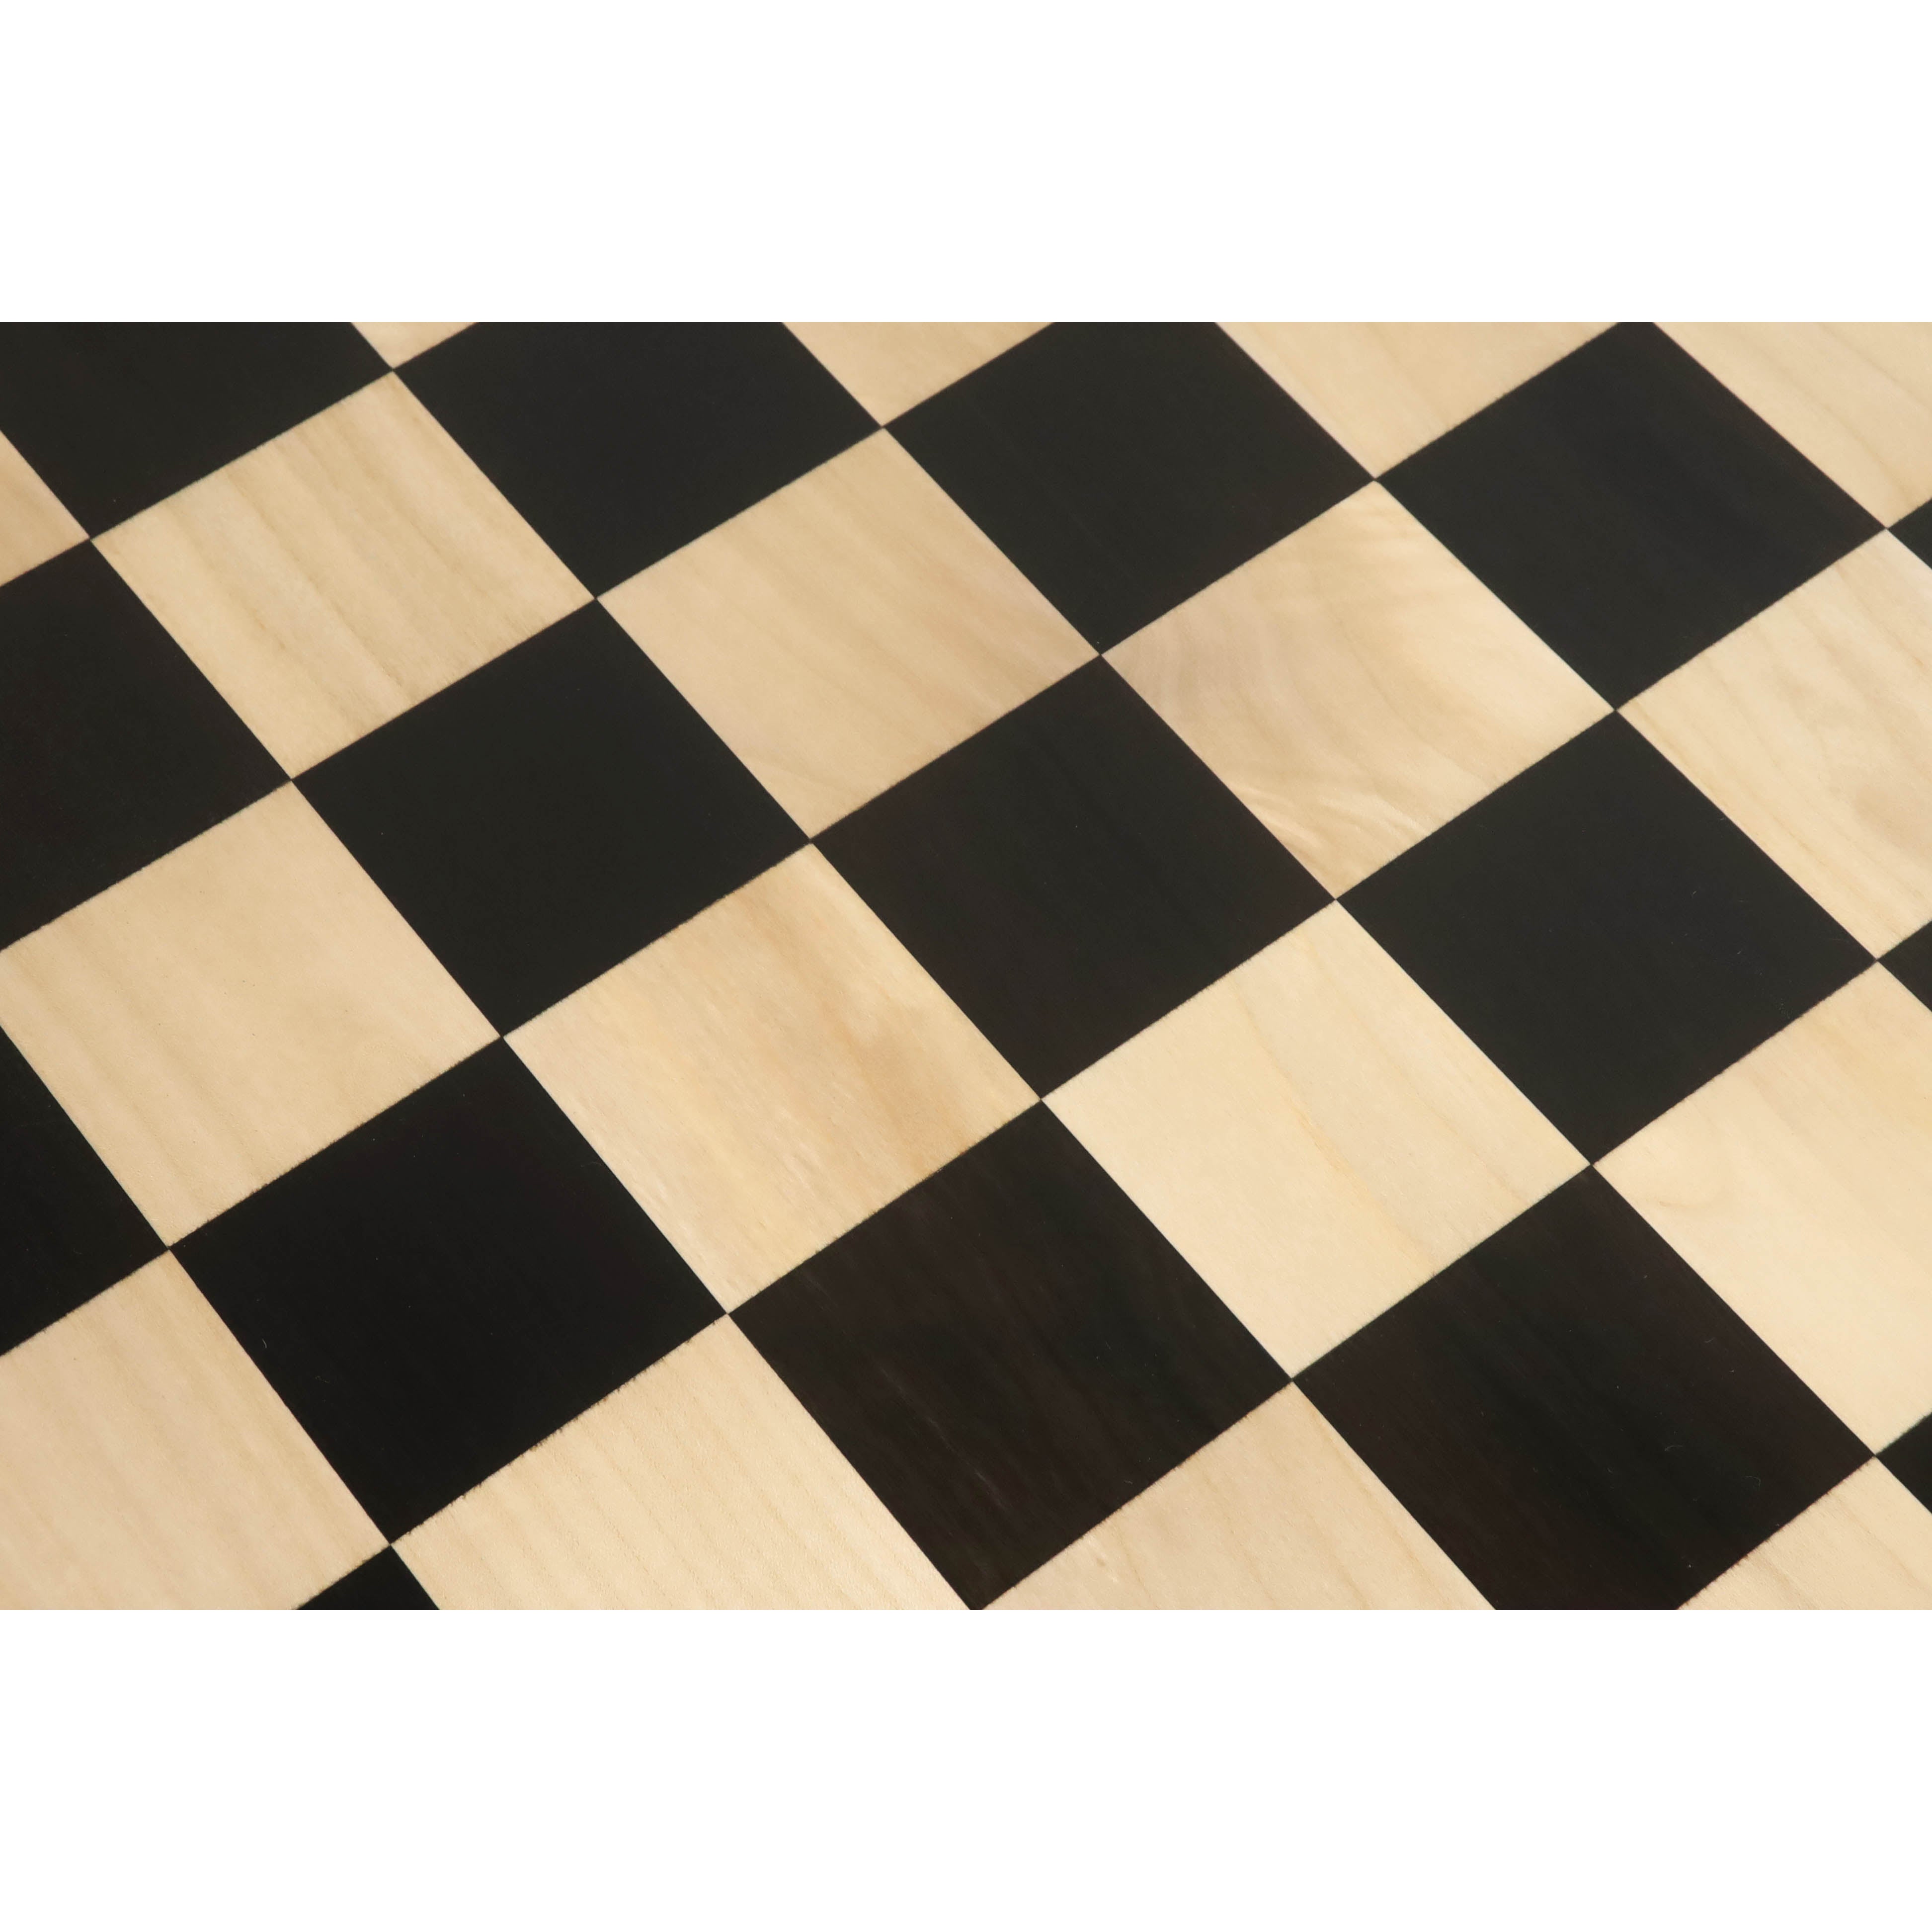 Shop Ebony & Maple Wood Chessboard sheesham borders | Hand Carved Chess Pieces